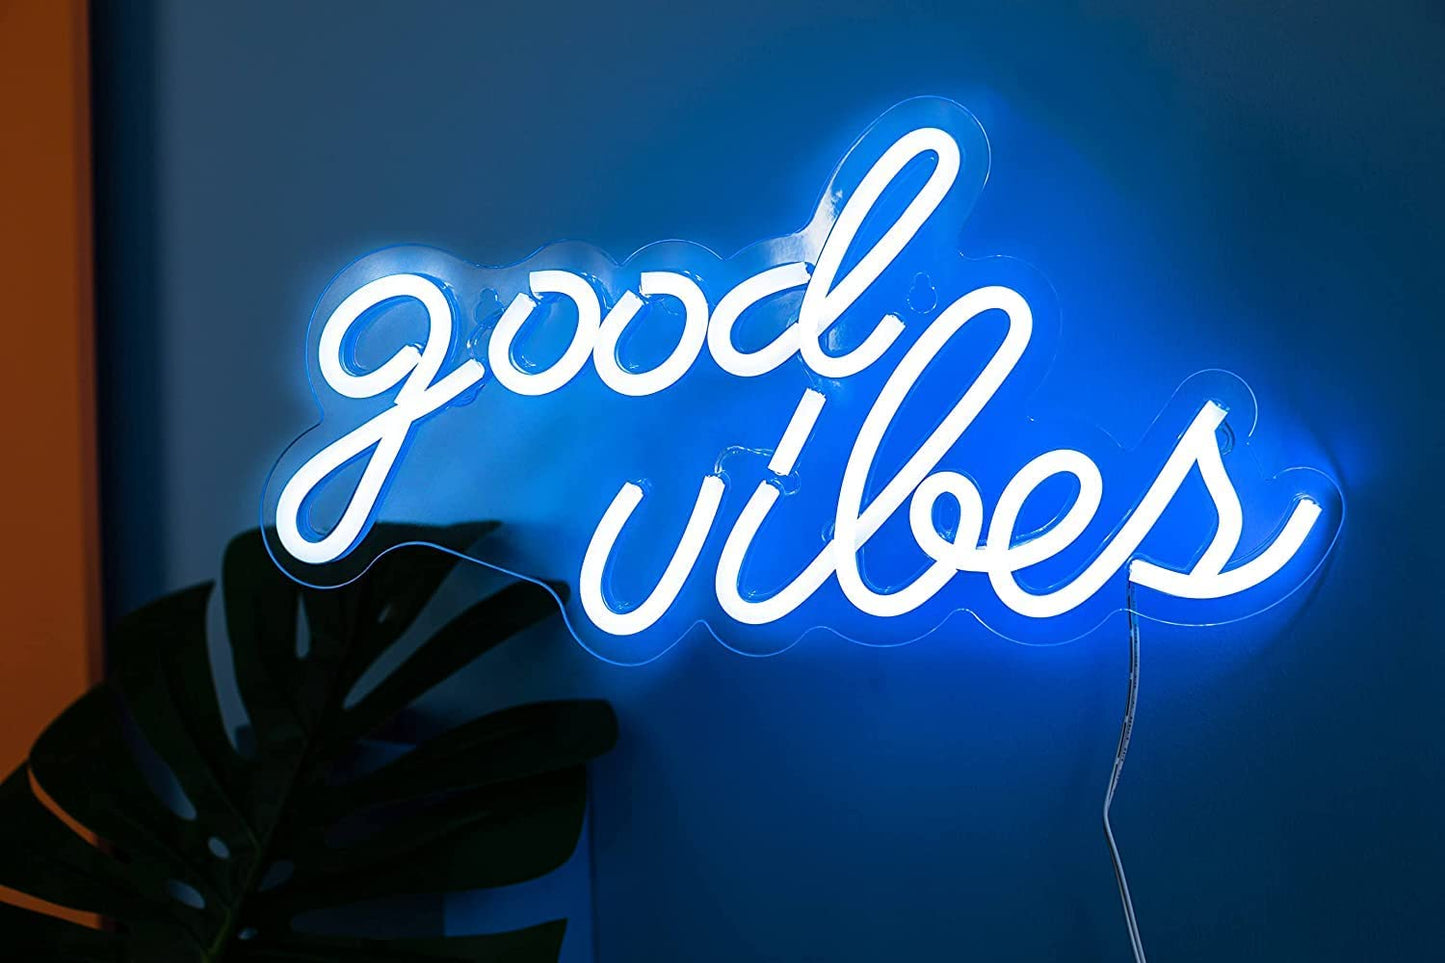 Good Vibes Neon Sign for Bedroom Wall Decor Powered by USB Neon Light, Ice Blue Color,16.1"X8.3"X0.6"